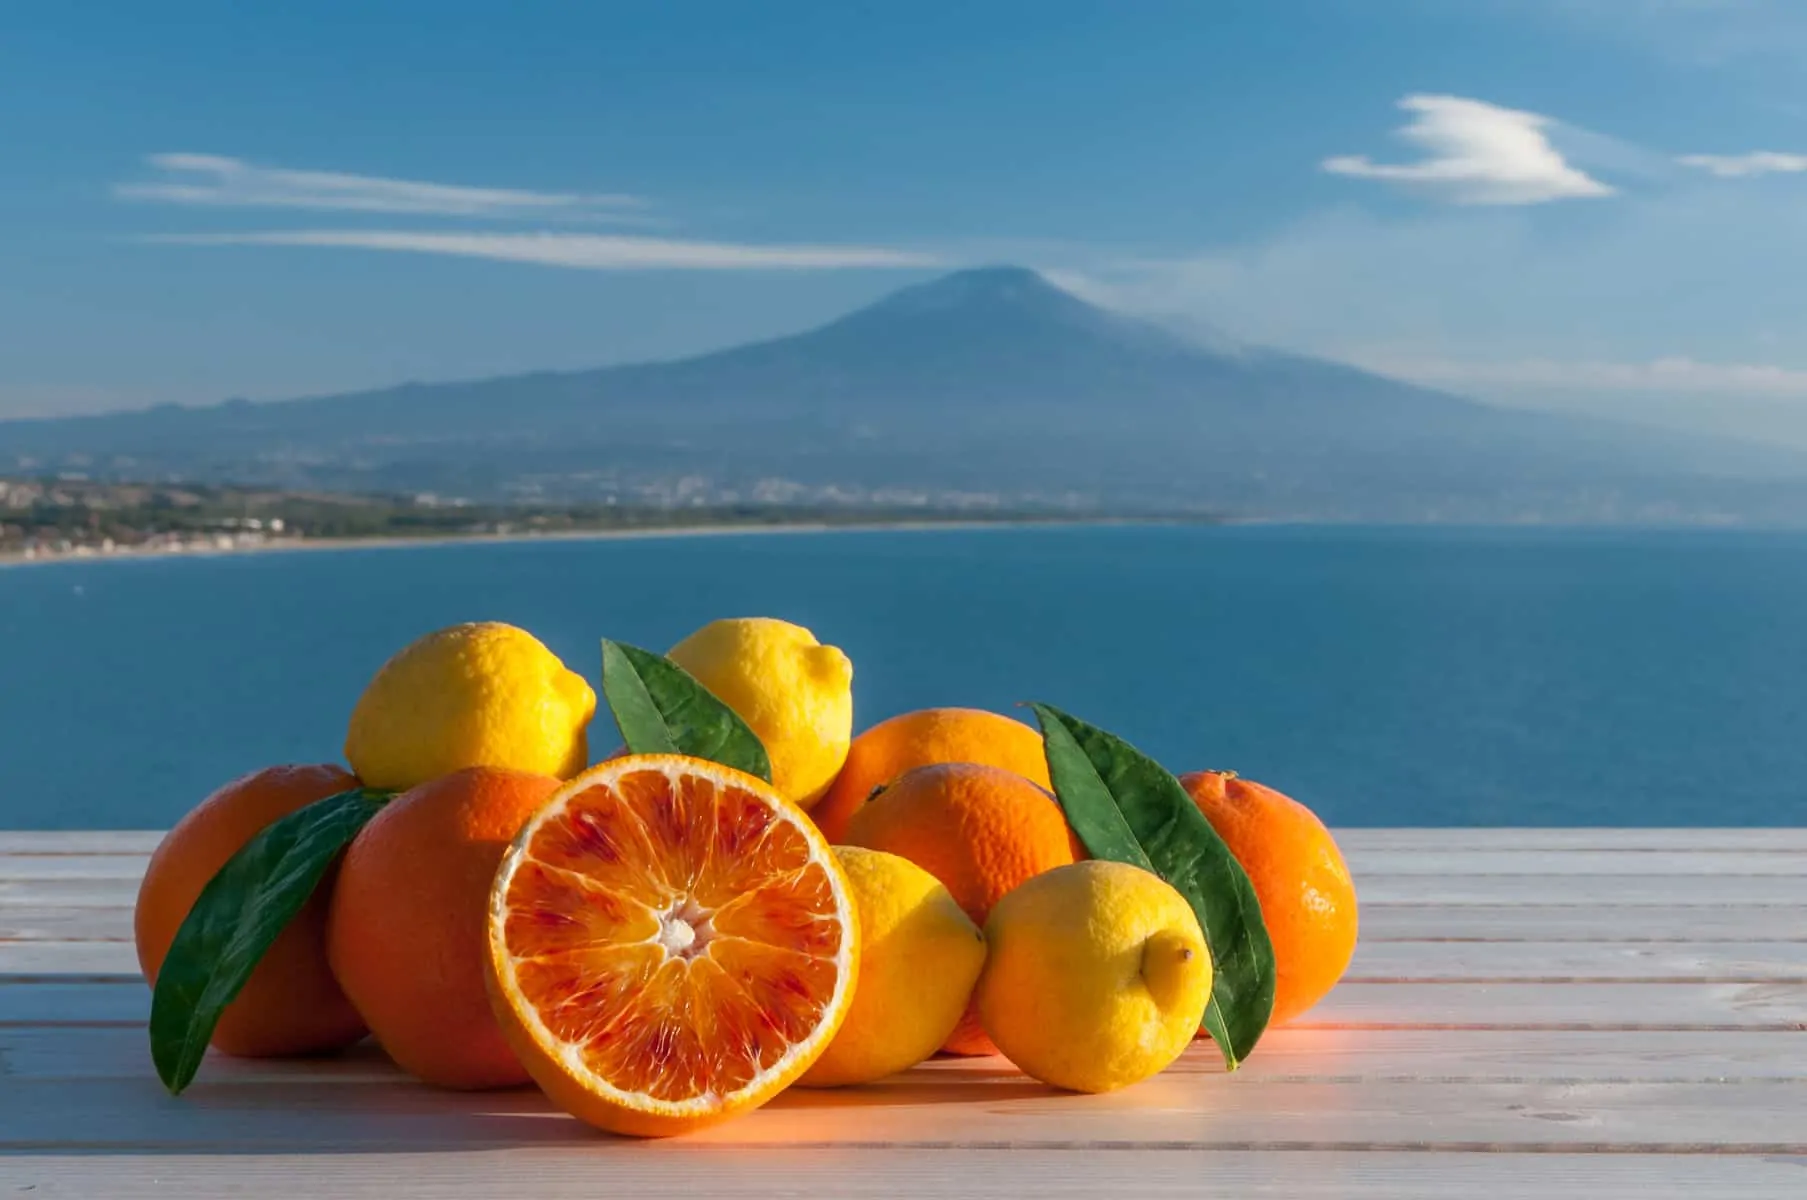 Oranges and lemons on a wooden table with blue sea, Mount Etna and clouds in the background